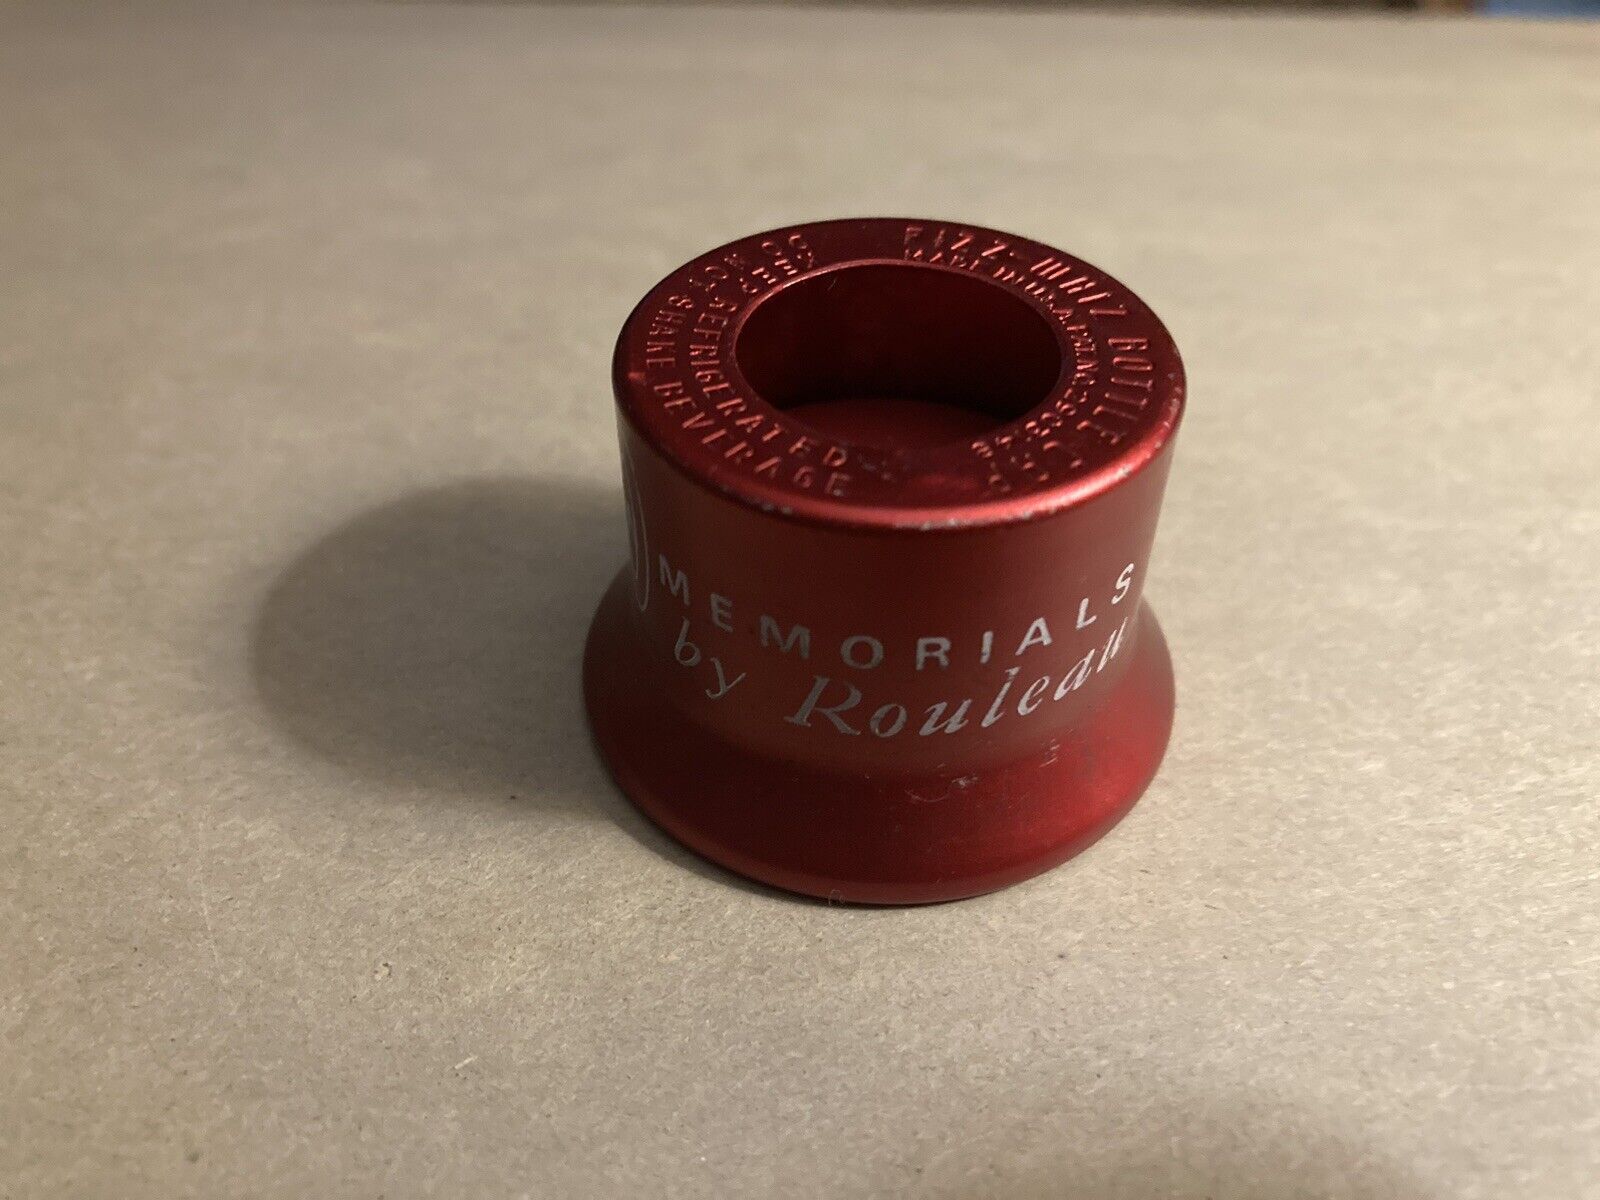 Barre Vermont Advertising Bottle Cap By Rouleau Granite Co.